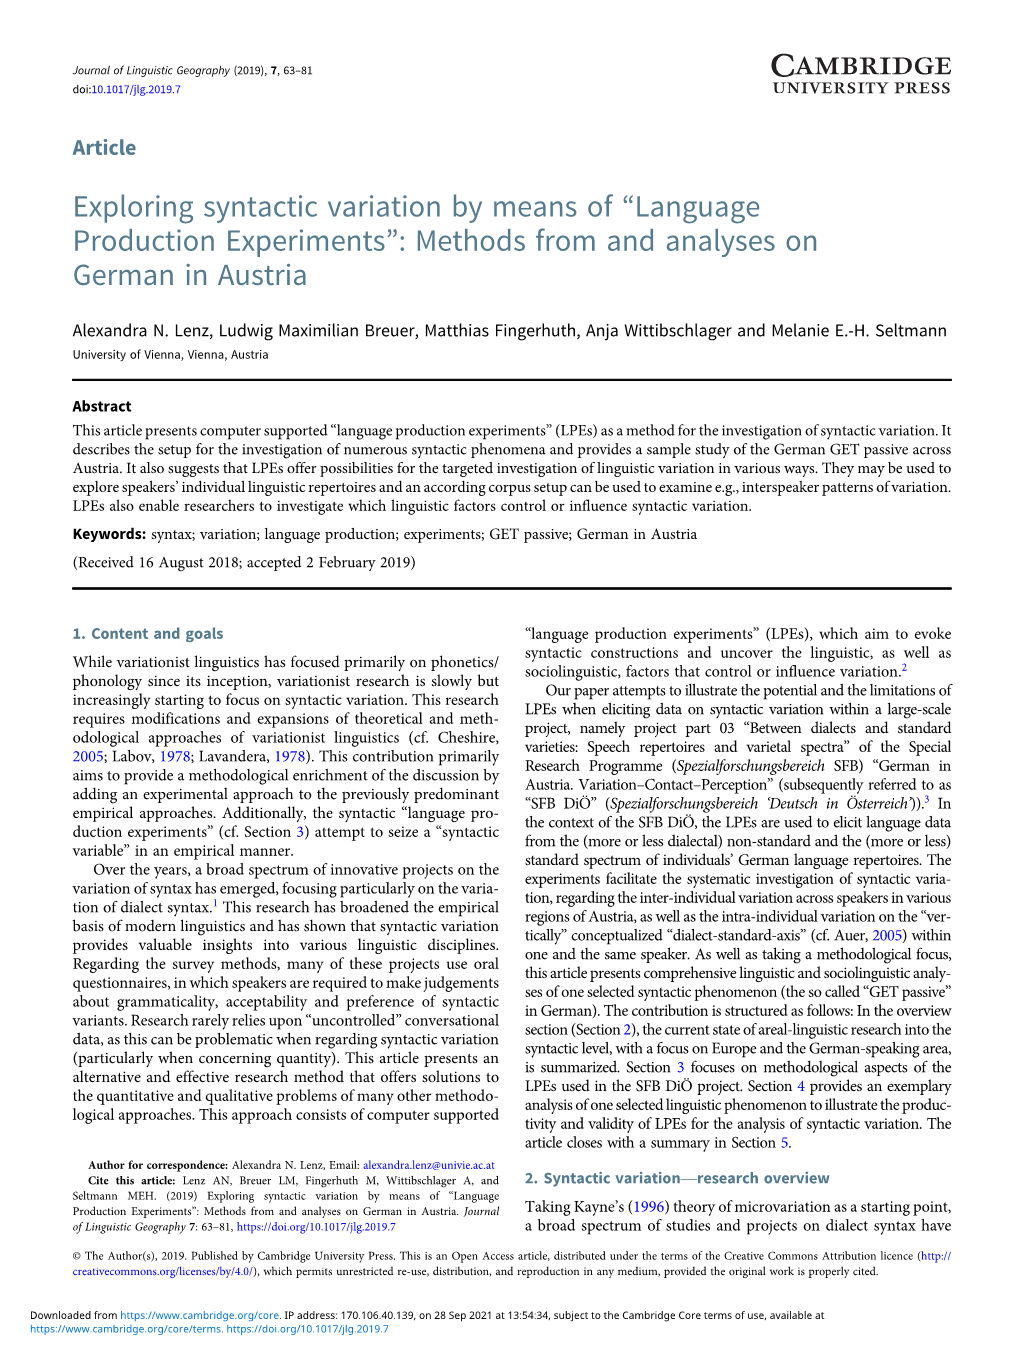 Exploring Syntactic Variation by Means of “Language Production Experiments”: Methods from and Analyses on German in Austria